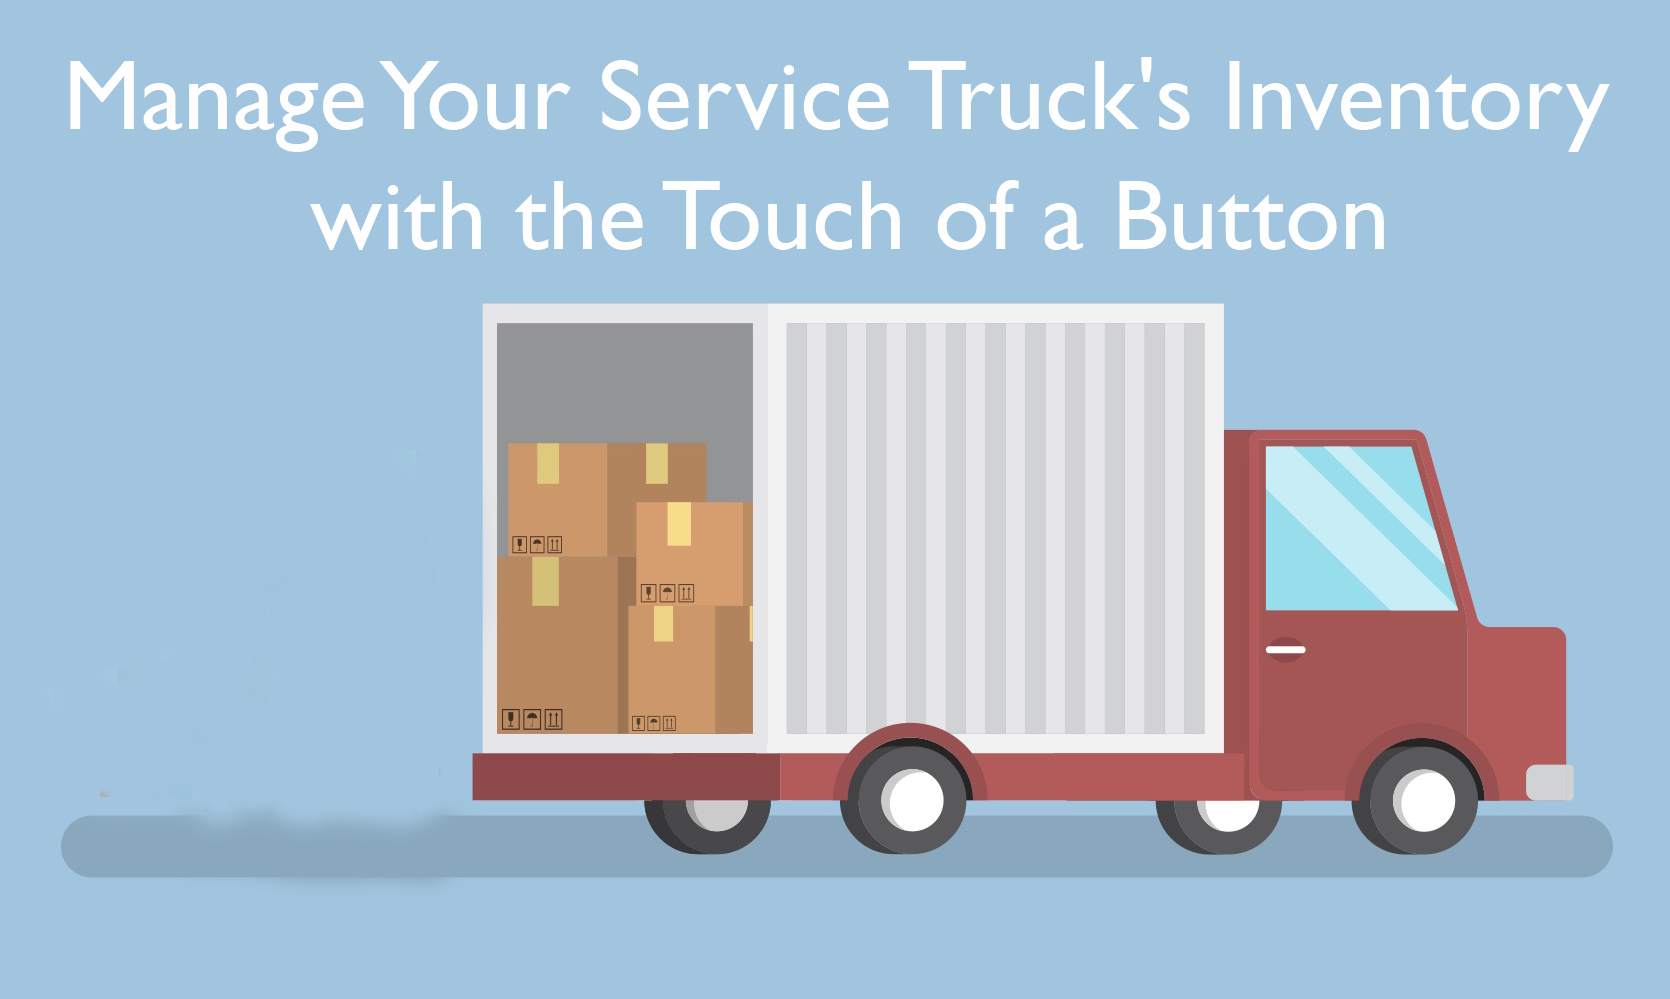 Manage Your Service Truck's Inventory with the Touch of a Button